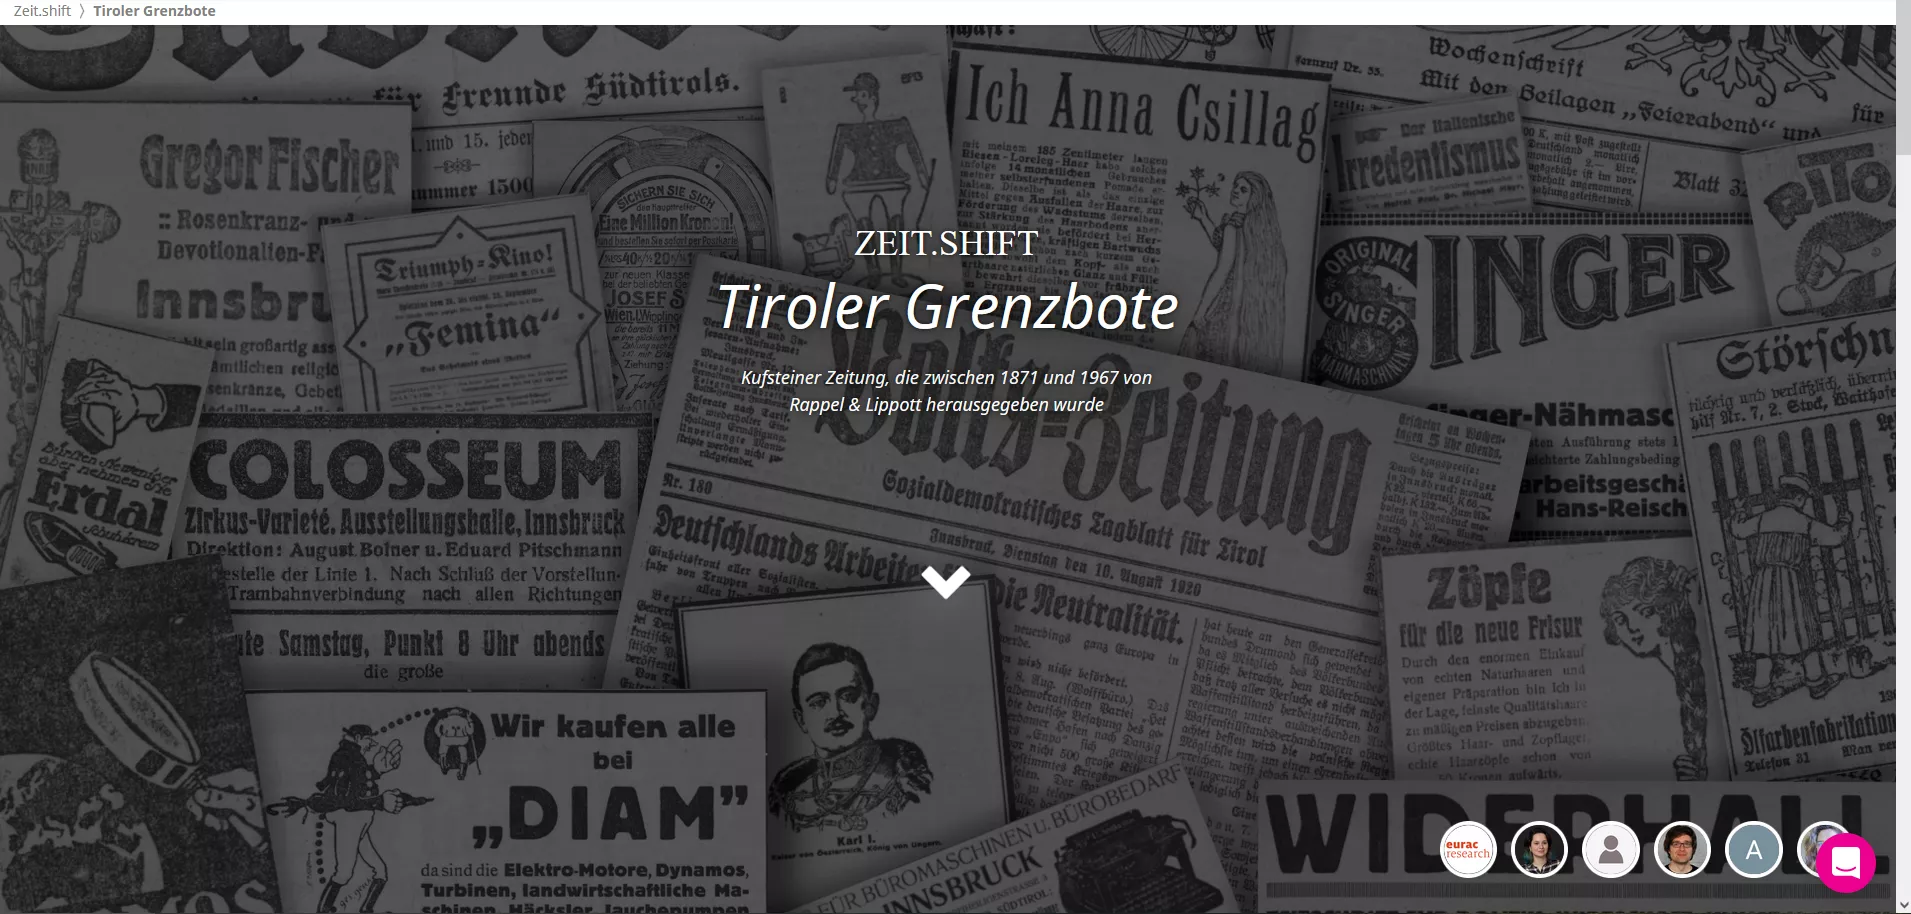 Landing page of the <strong>Tiroler Grenzbote</strong> subcollection within Zeit.shift.